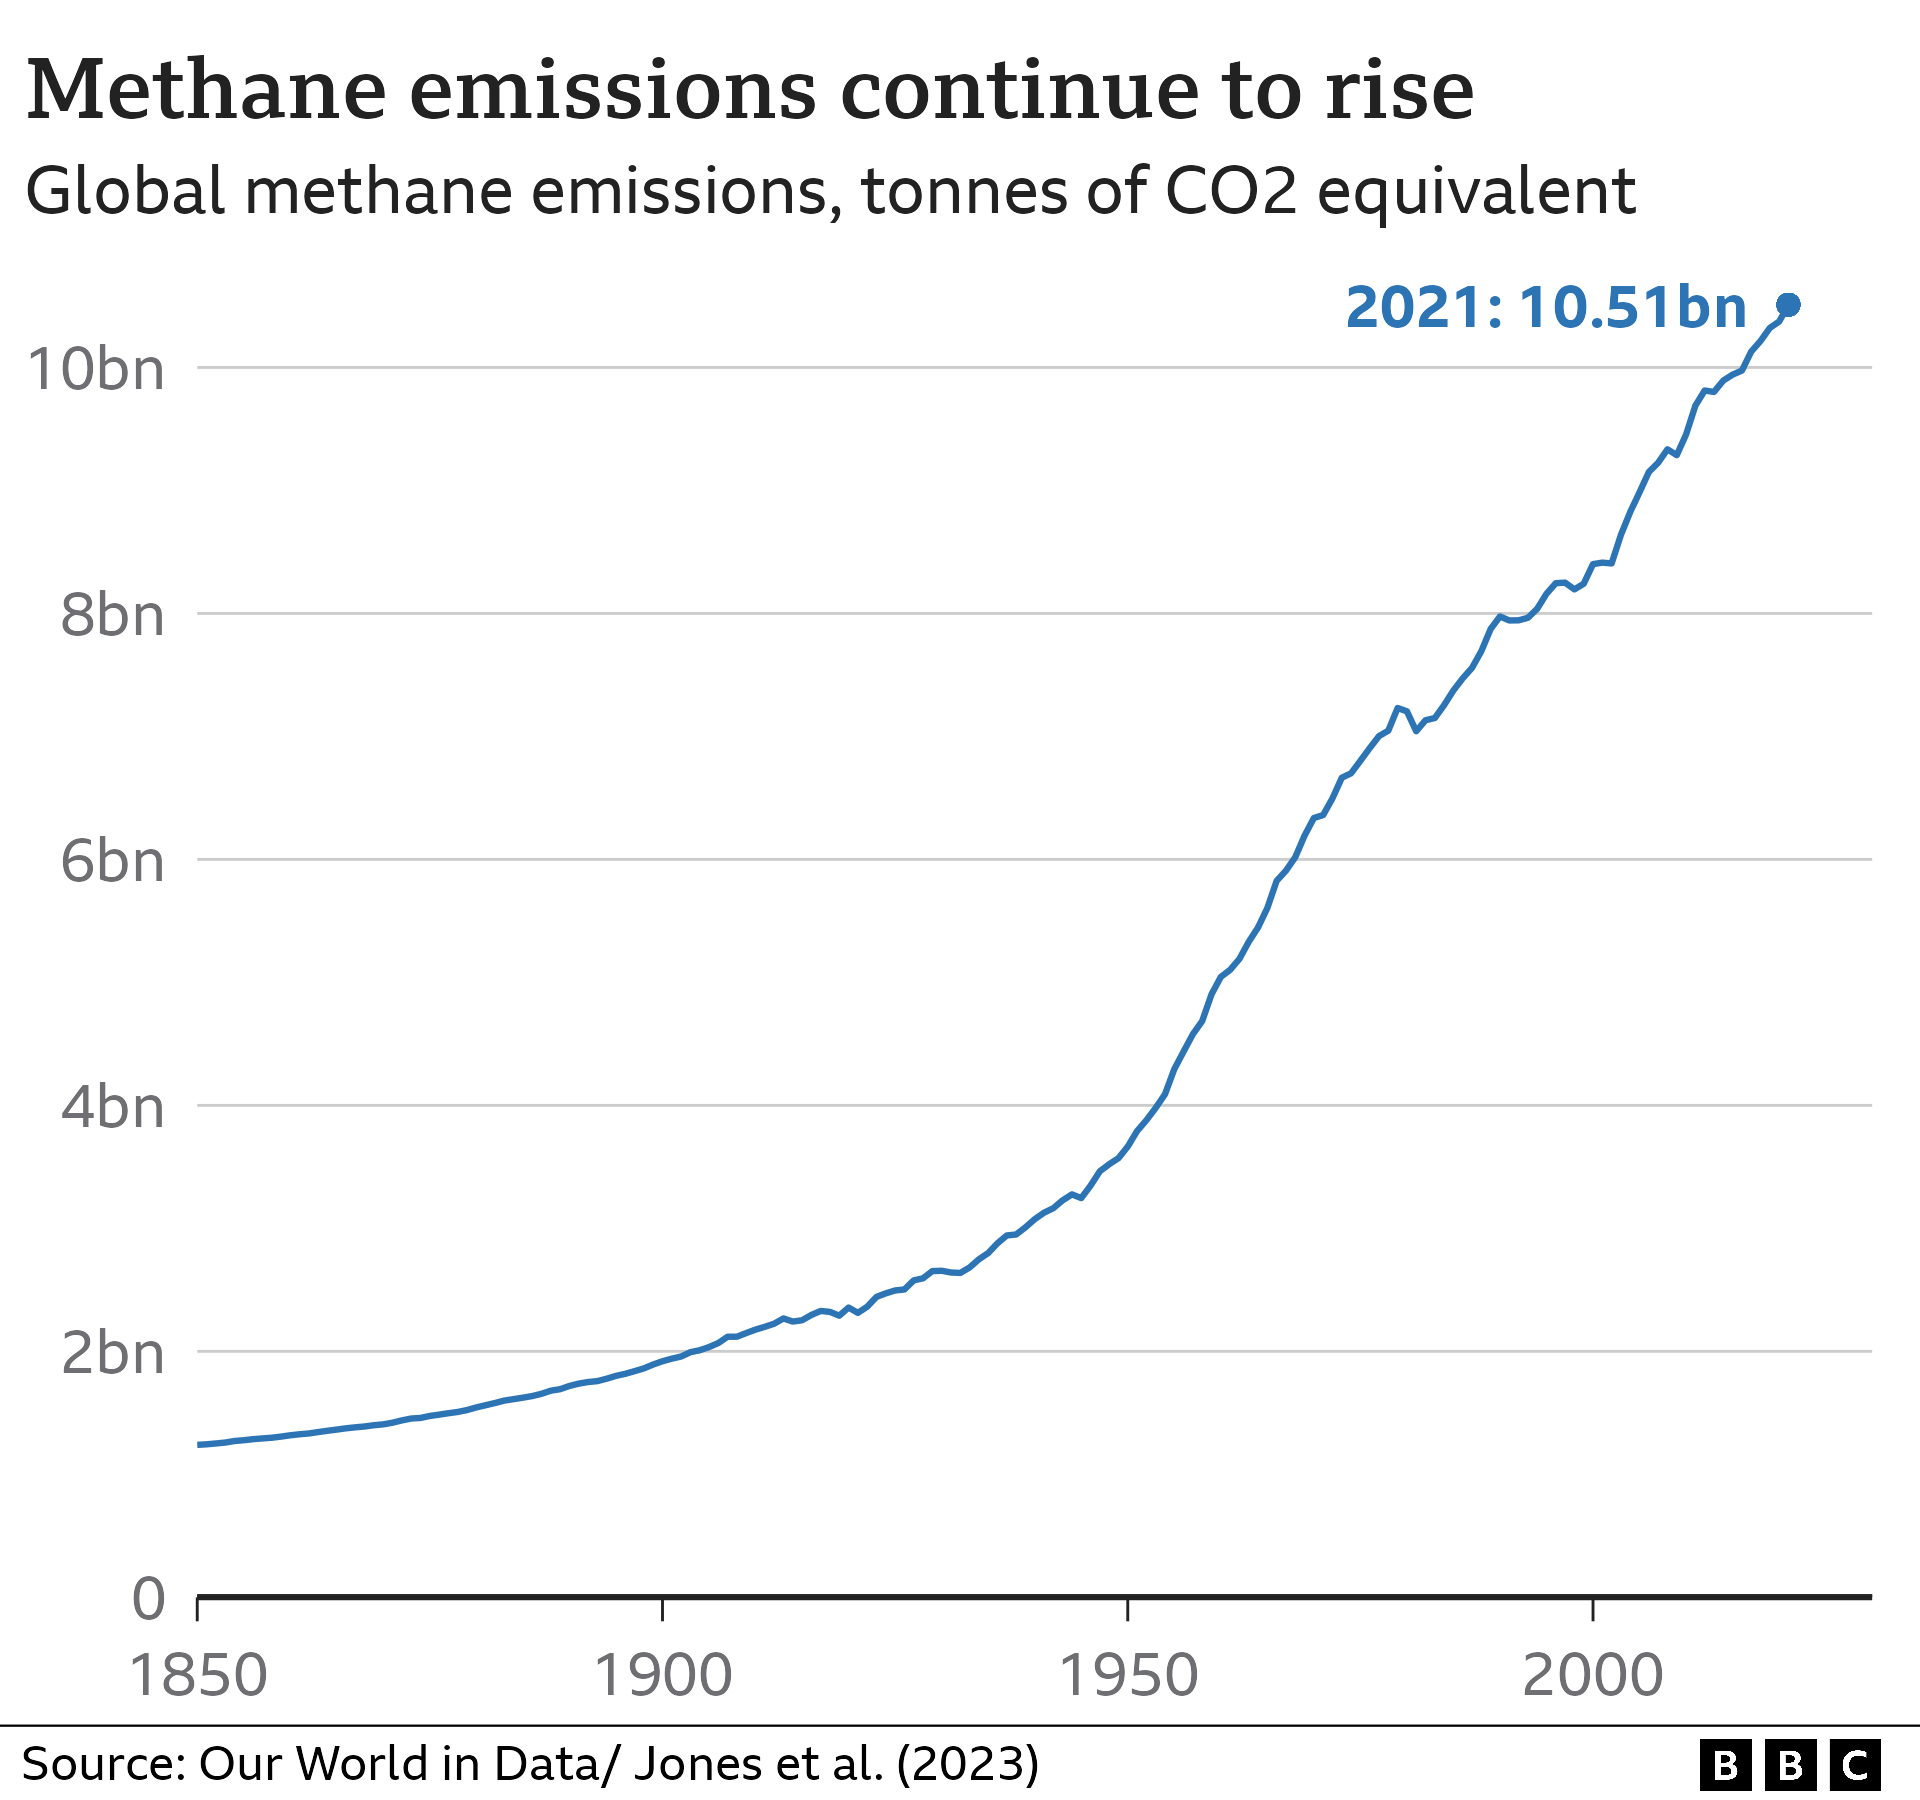 Line graph showing rising global methane emissions since 1850. In 2021 they reached 10.51 billion tonnes of CO2-equivalent.